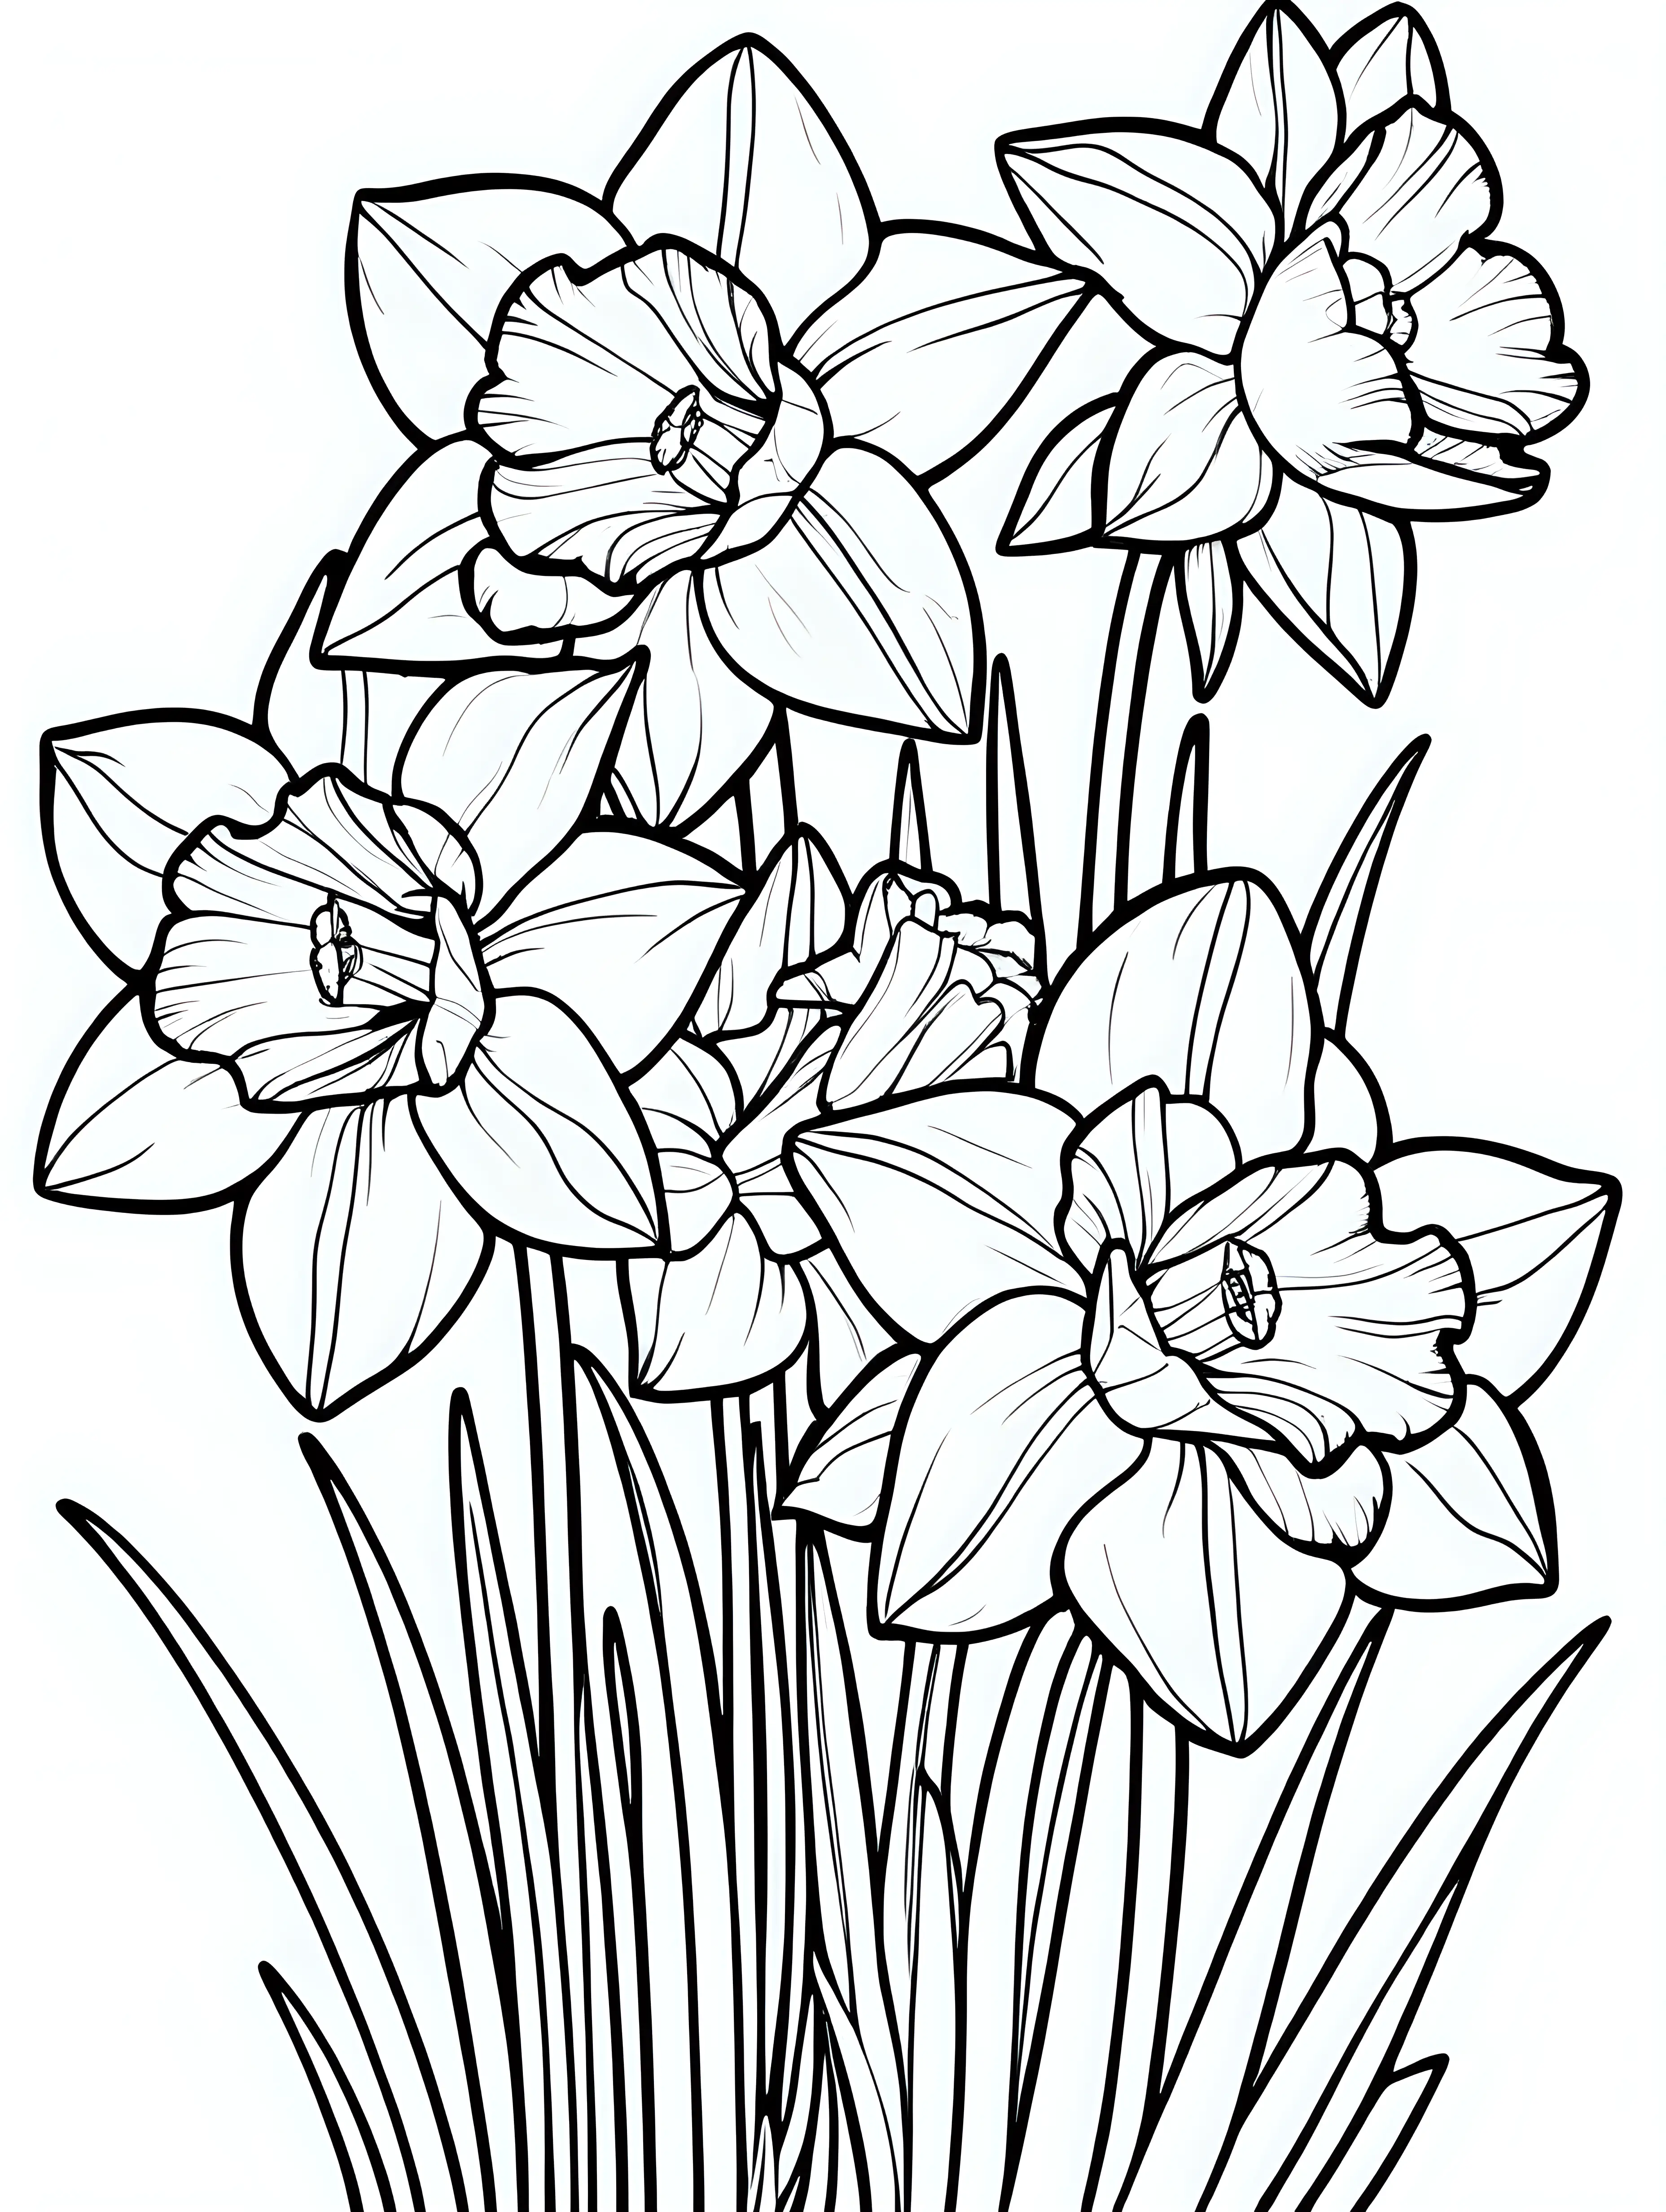 Elegant Black and White Narcissus Flowers Coloring Page